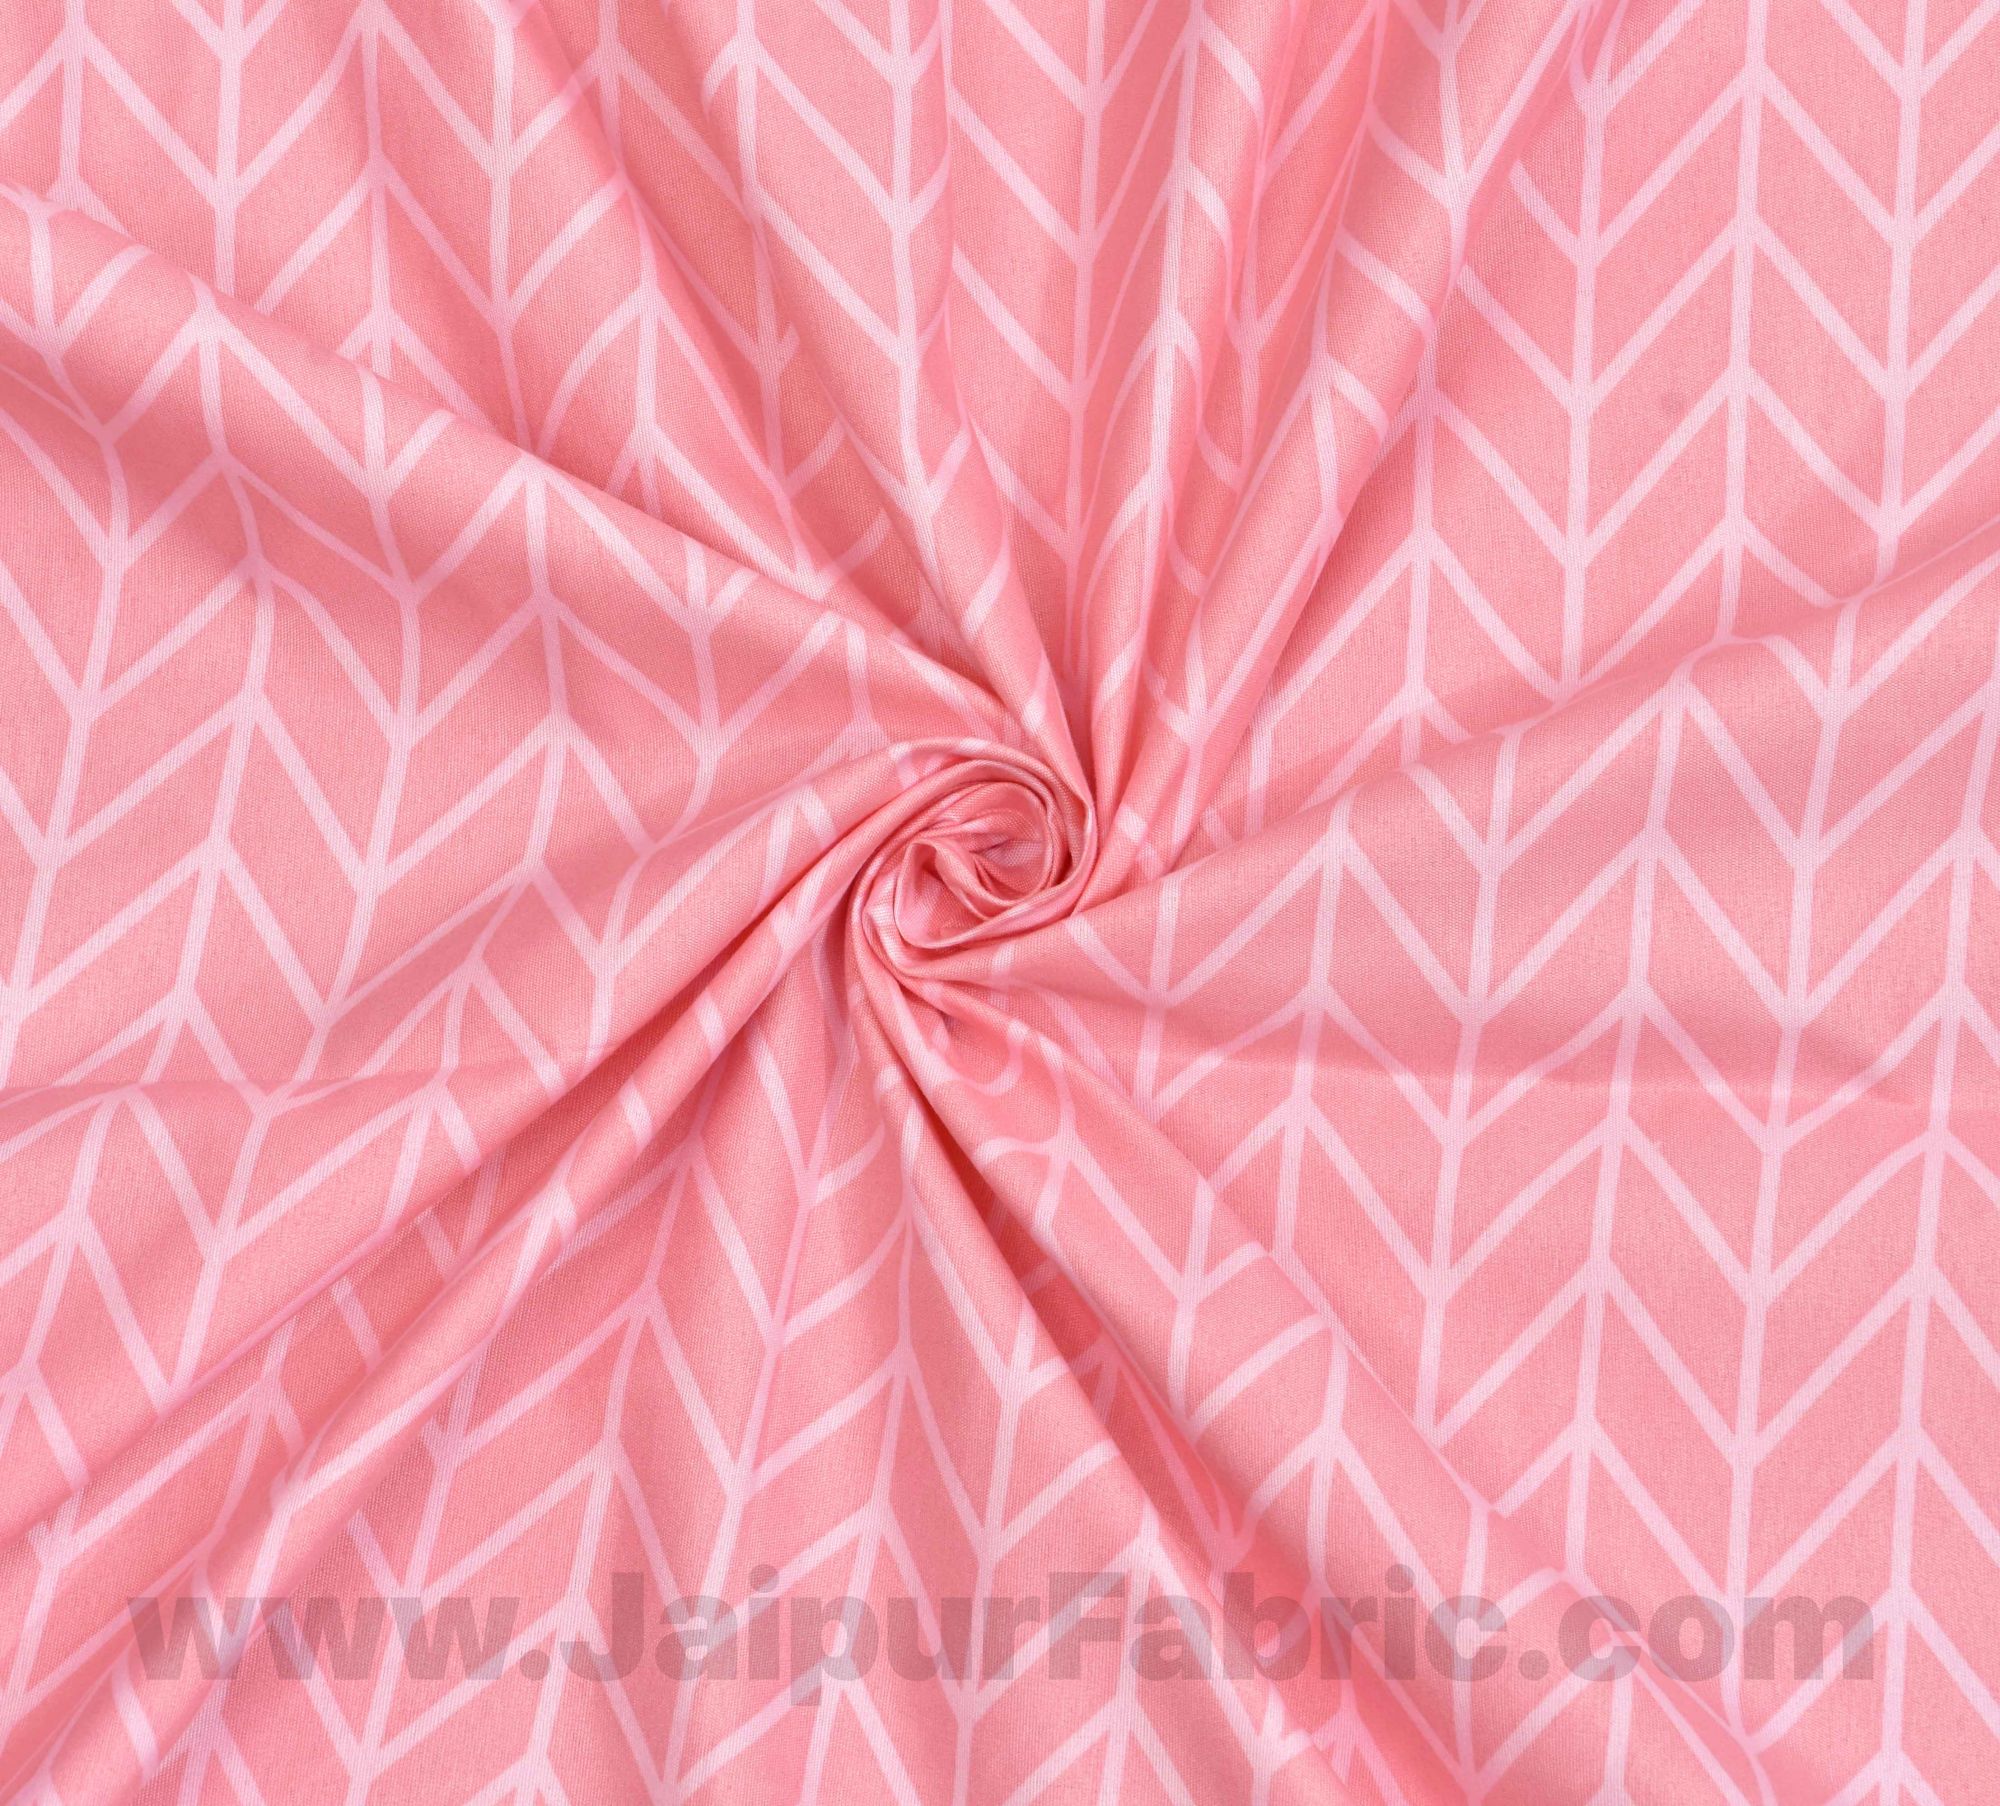 Baby Pink Super Soft Double Bedsheet